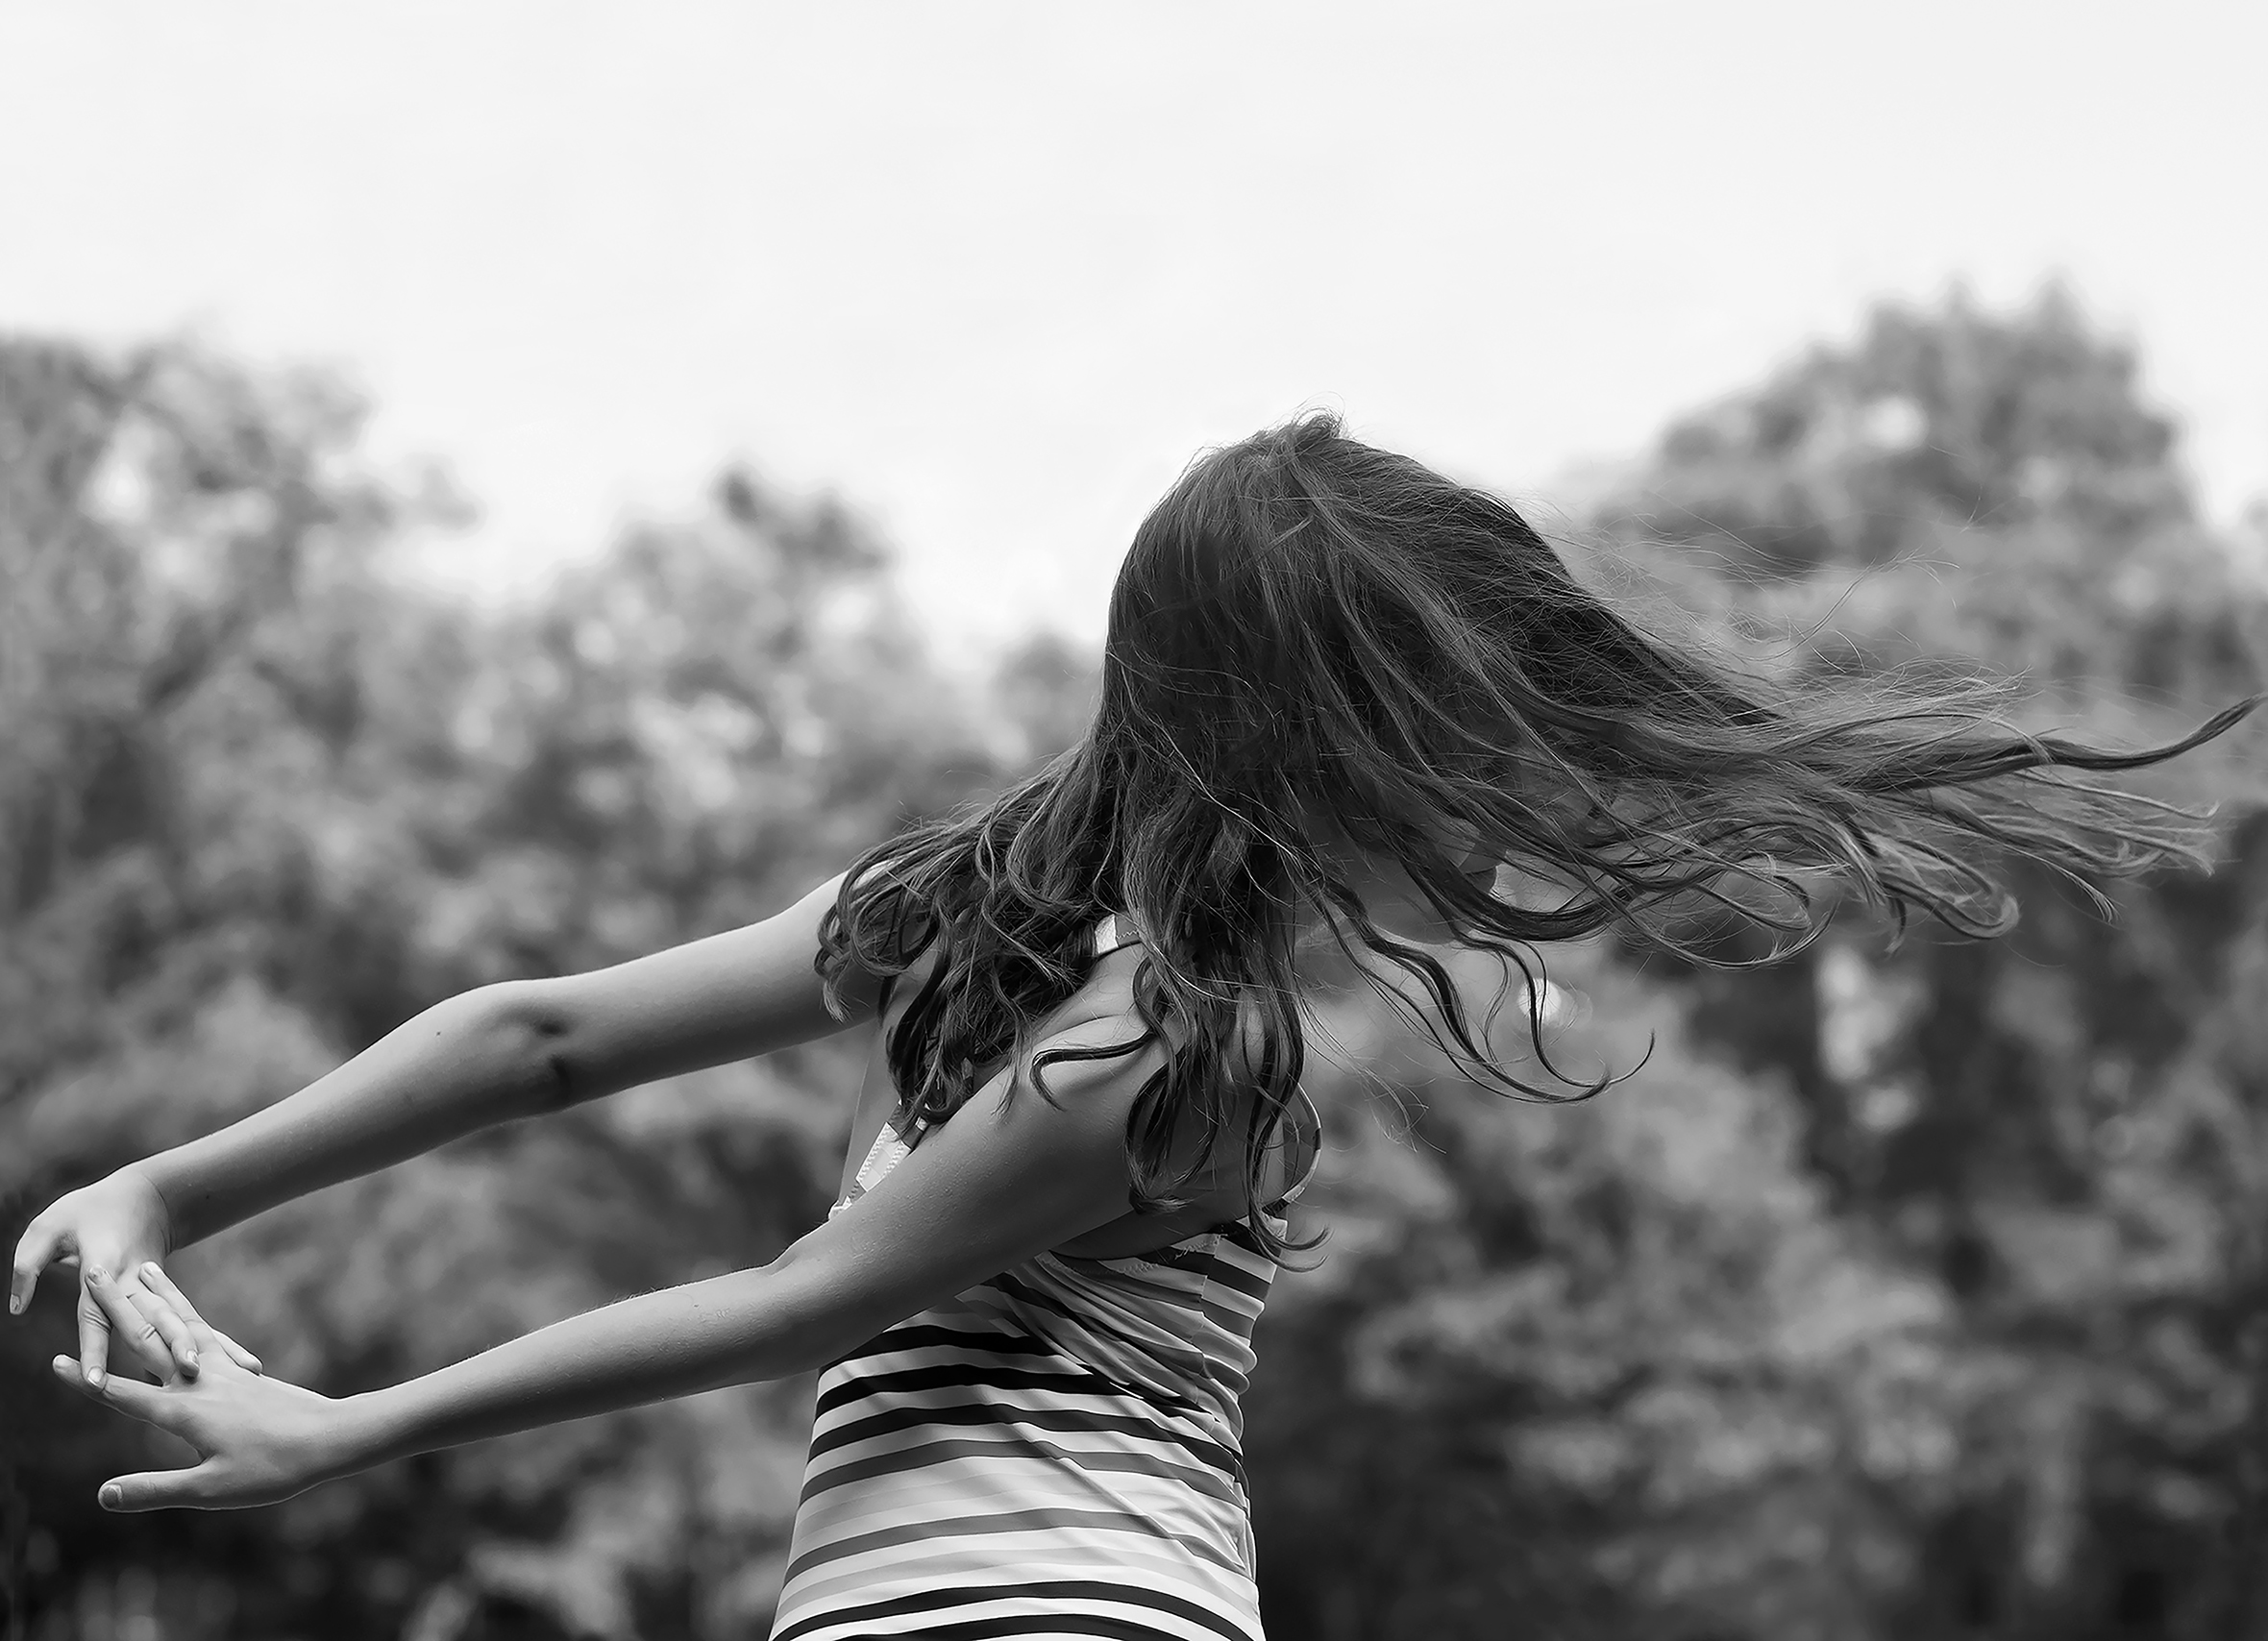 A young girl with long, brown hair is twirling around. Her arms are extended behind her and her fingers are interlaced, and her hair is flowing out as she twirls around outside with a backdrop of trees.